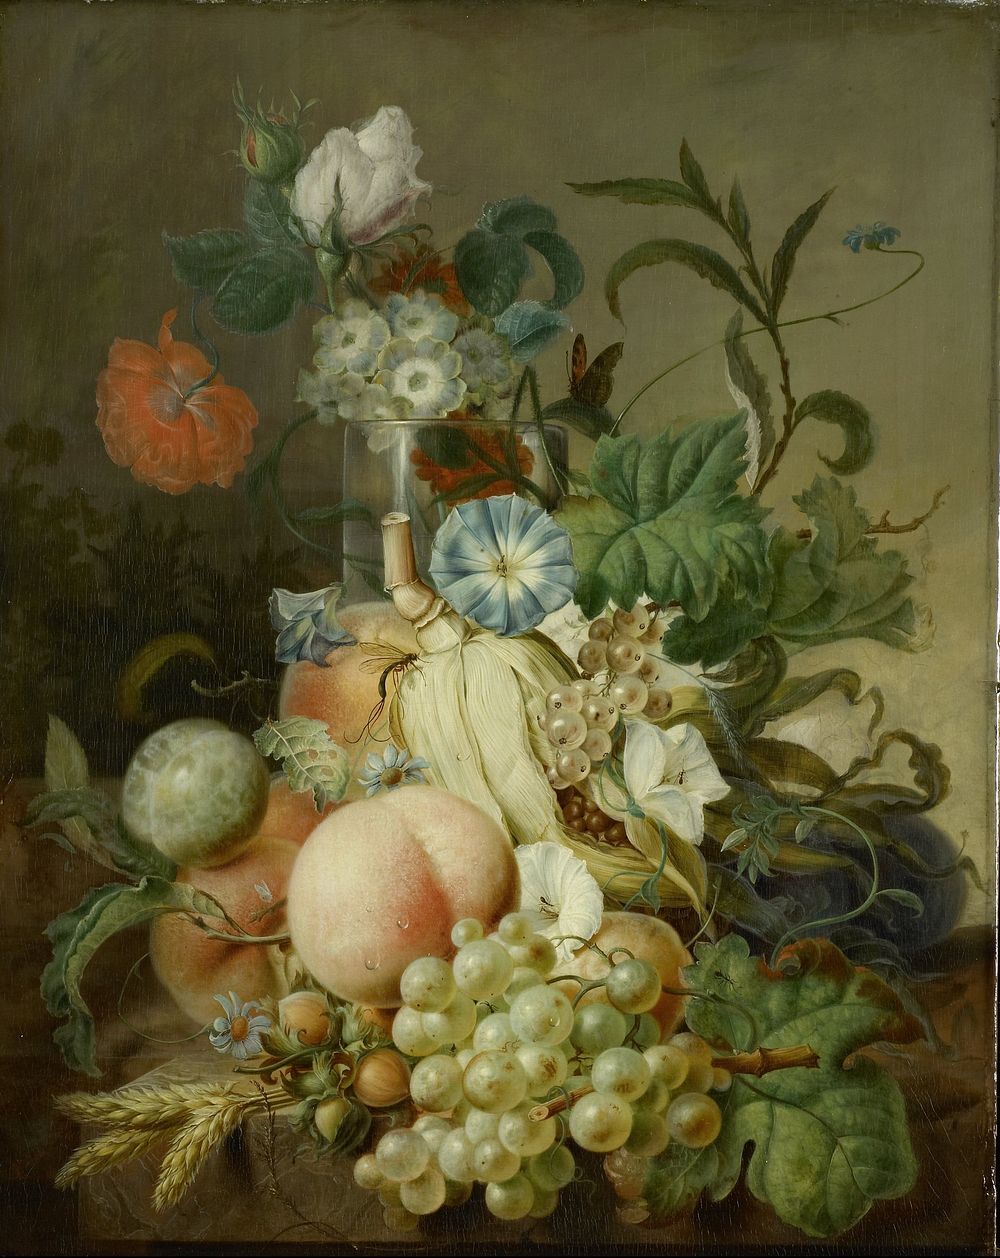 Still Life with Flowers and Fruit (1800 - 1808) by Jan Evert Morel I